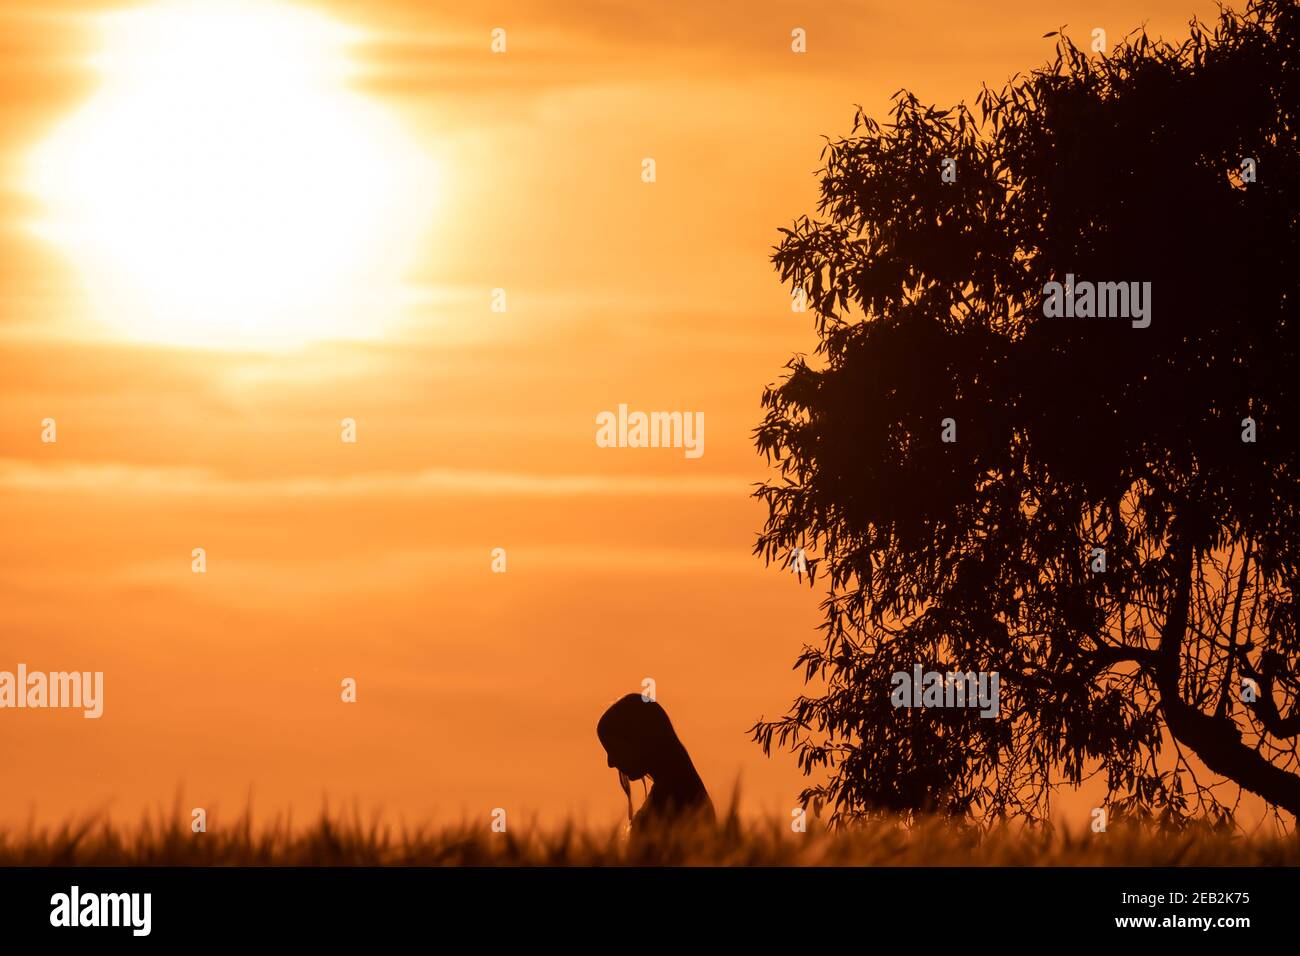 silhouette of girl with lowered head at sunset in a cereal field with ...